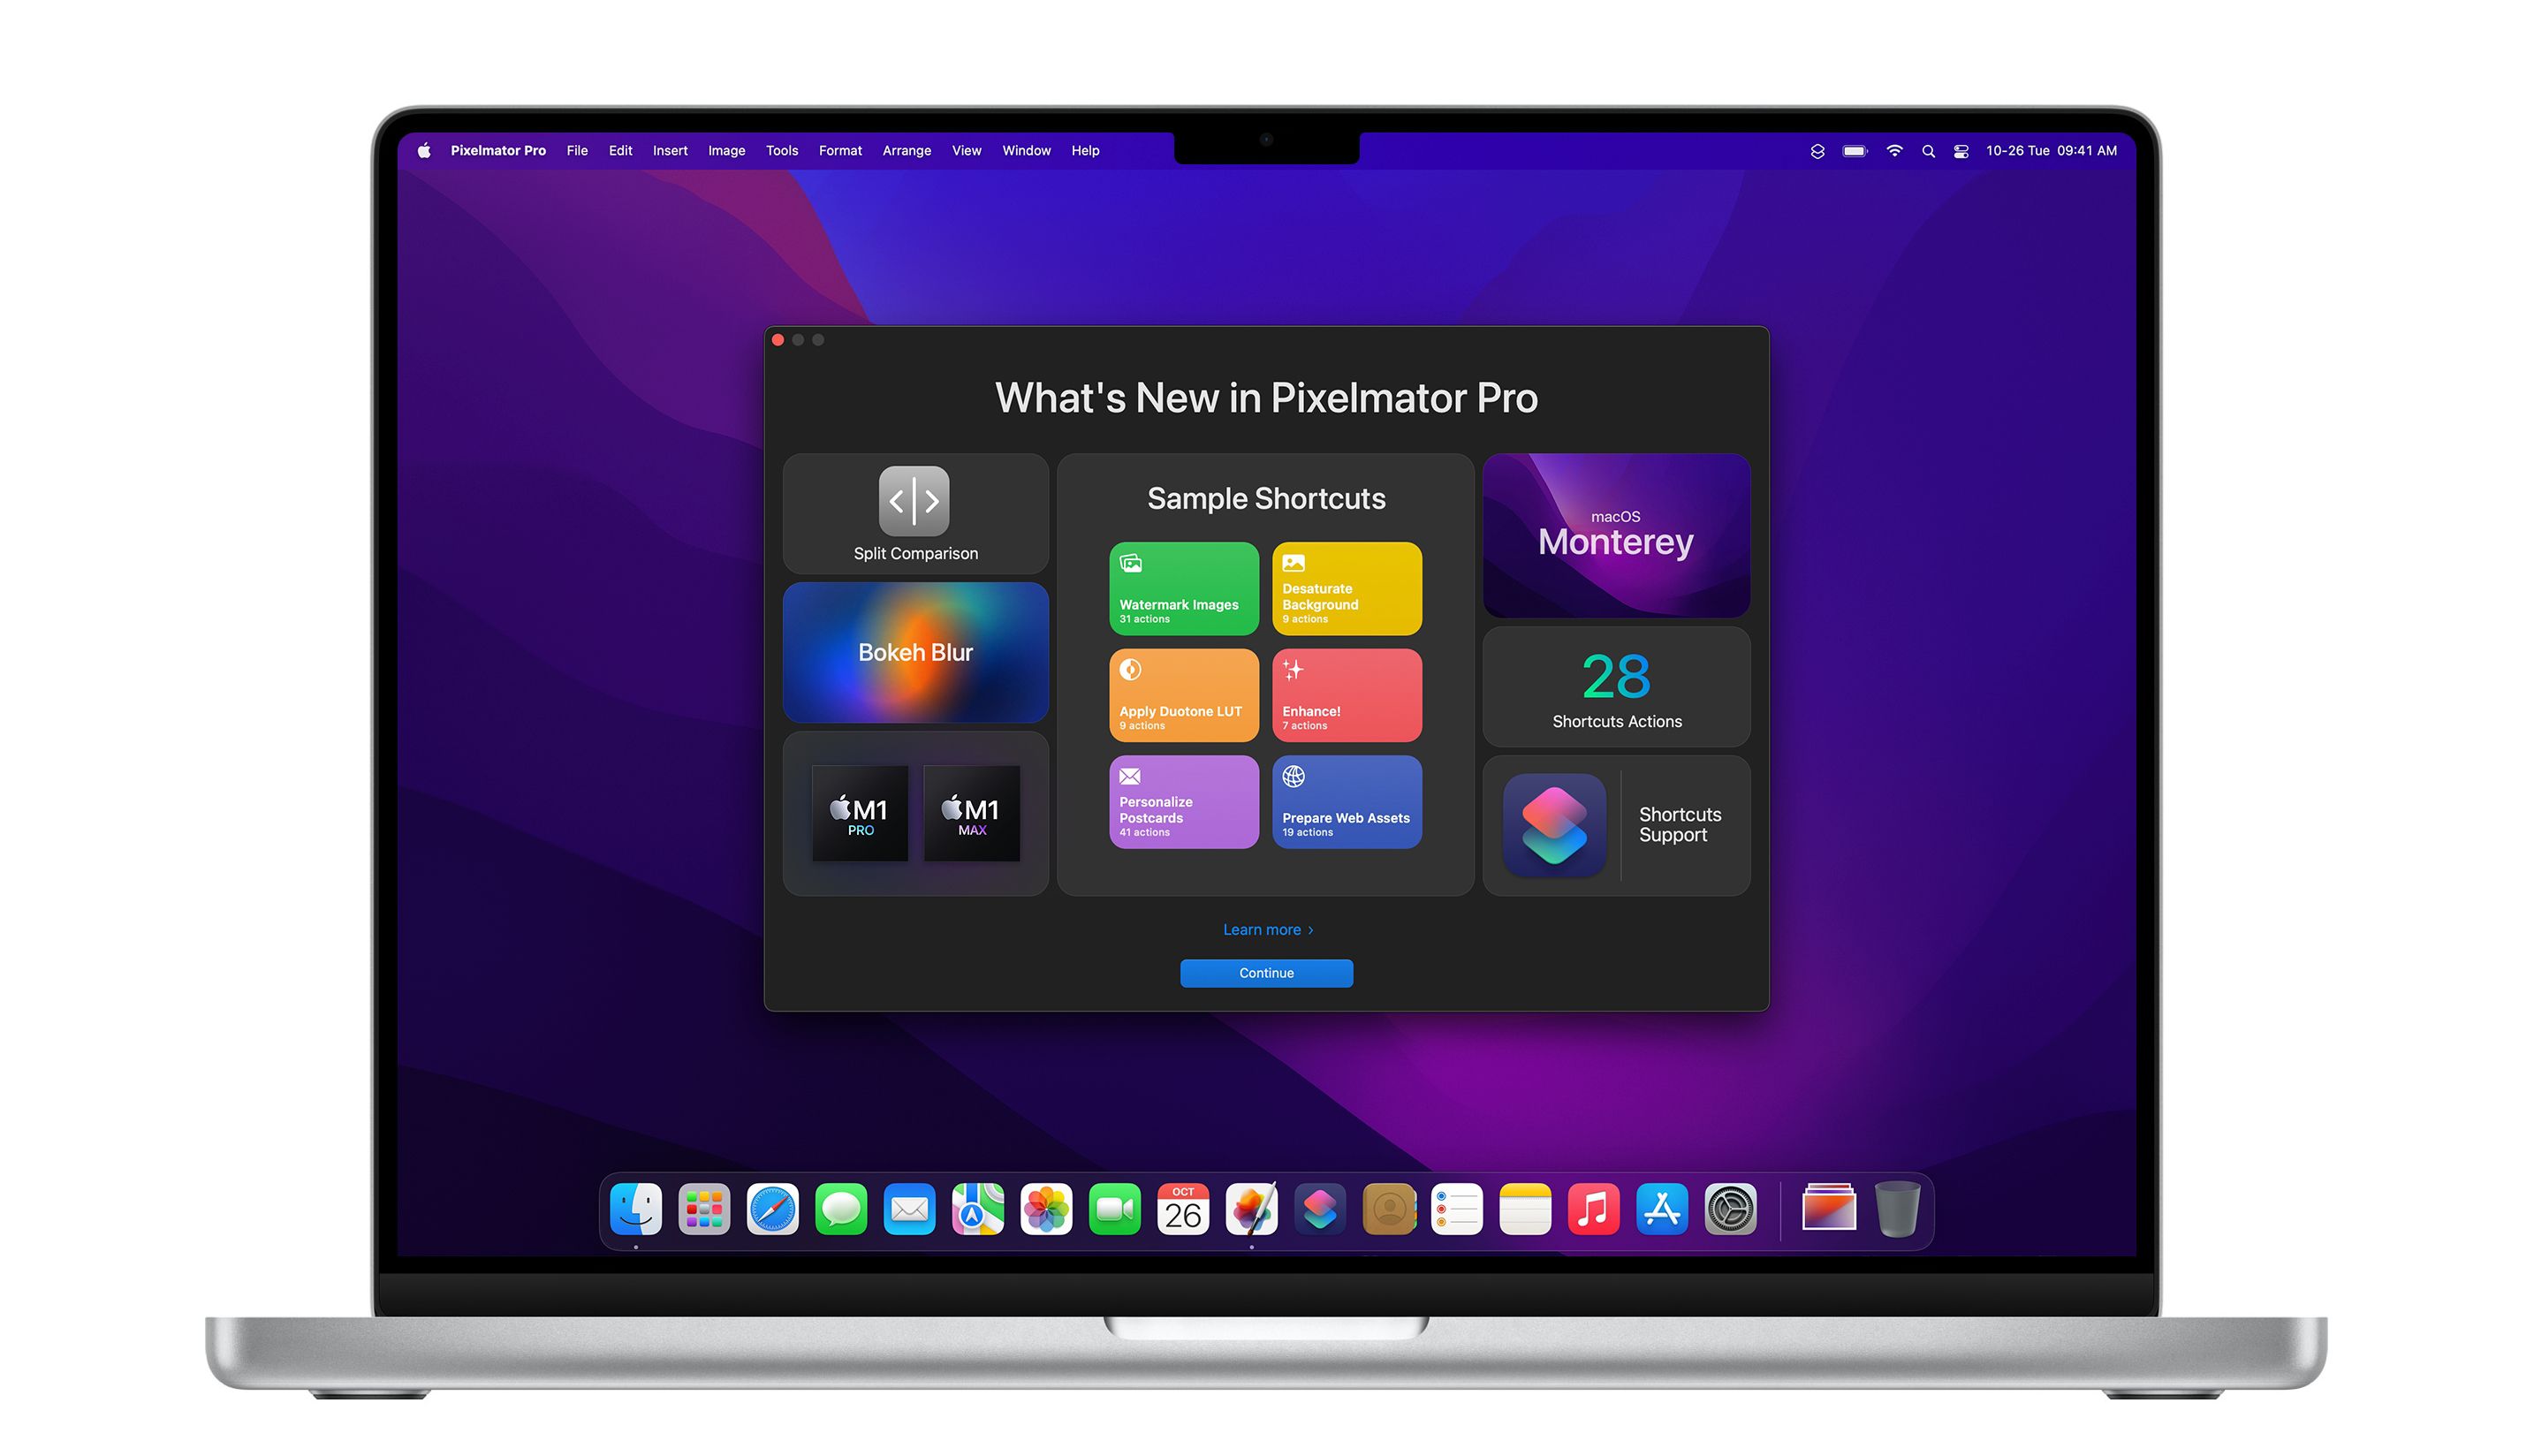 photo of Pixelmator Pro 2.2 Update Adds Monterey Support, 28 Shortcuts Actions, New Split Comparison View, and More image